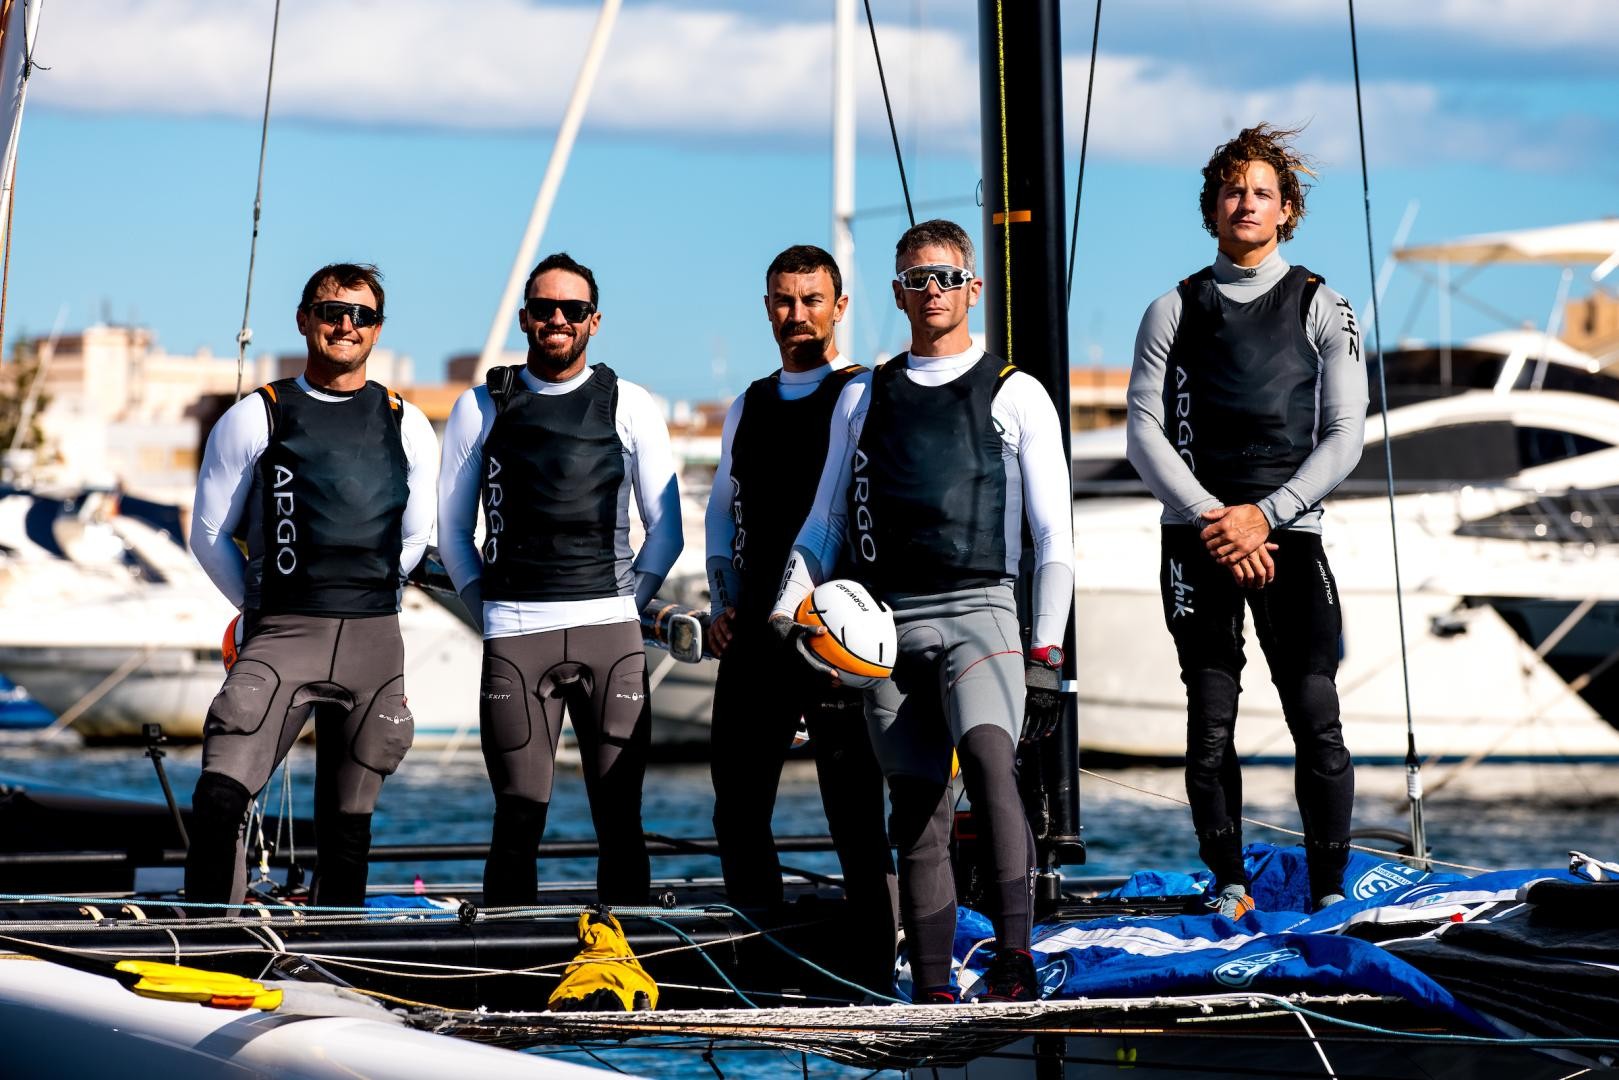 Argo's crew for the GC32 Mar Menor Cup (from left to right): Ted Hackney, Taylor Canfield, Kinley Fowler, Ben Bardwell, Ed Powys. Photo: Sailing Energy / GC32 Racing Tour